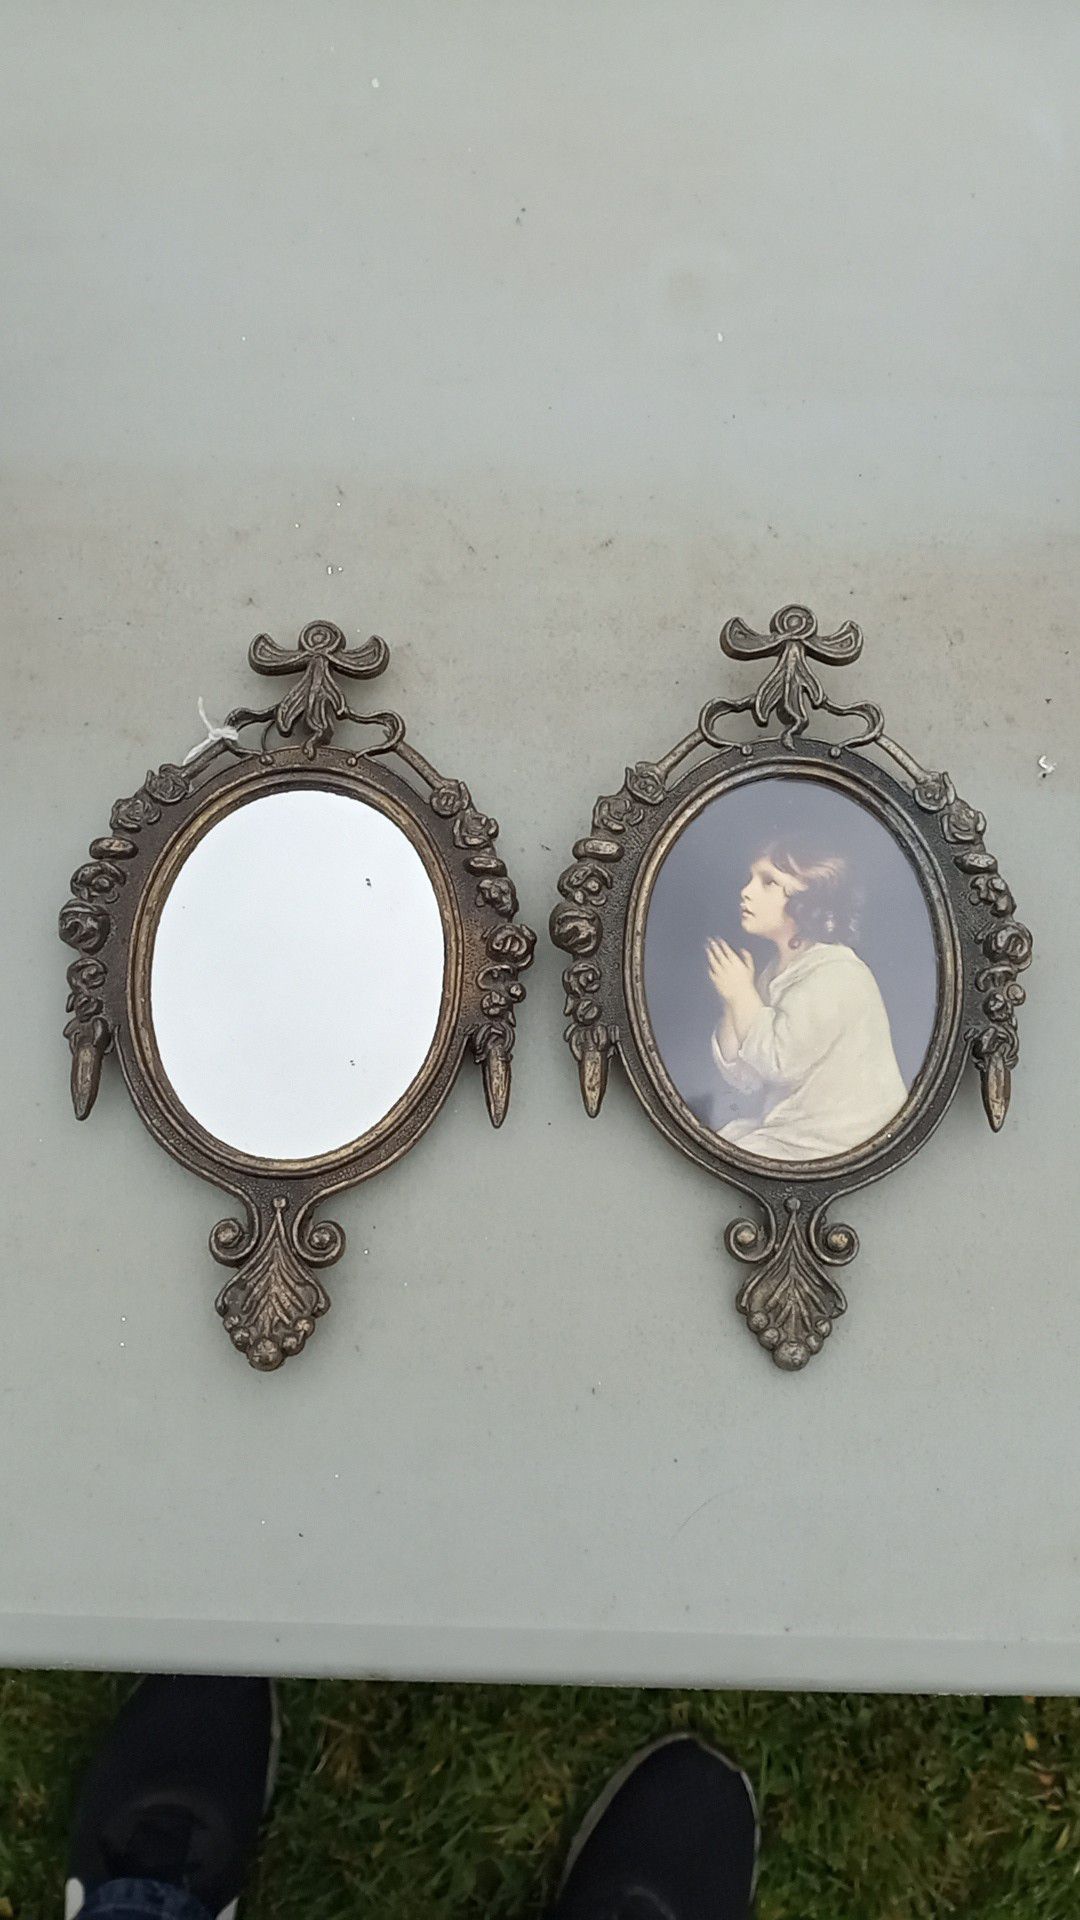 Made in italy antique mirror and frame combo